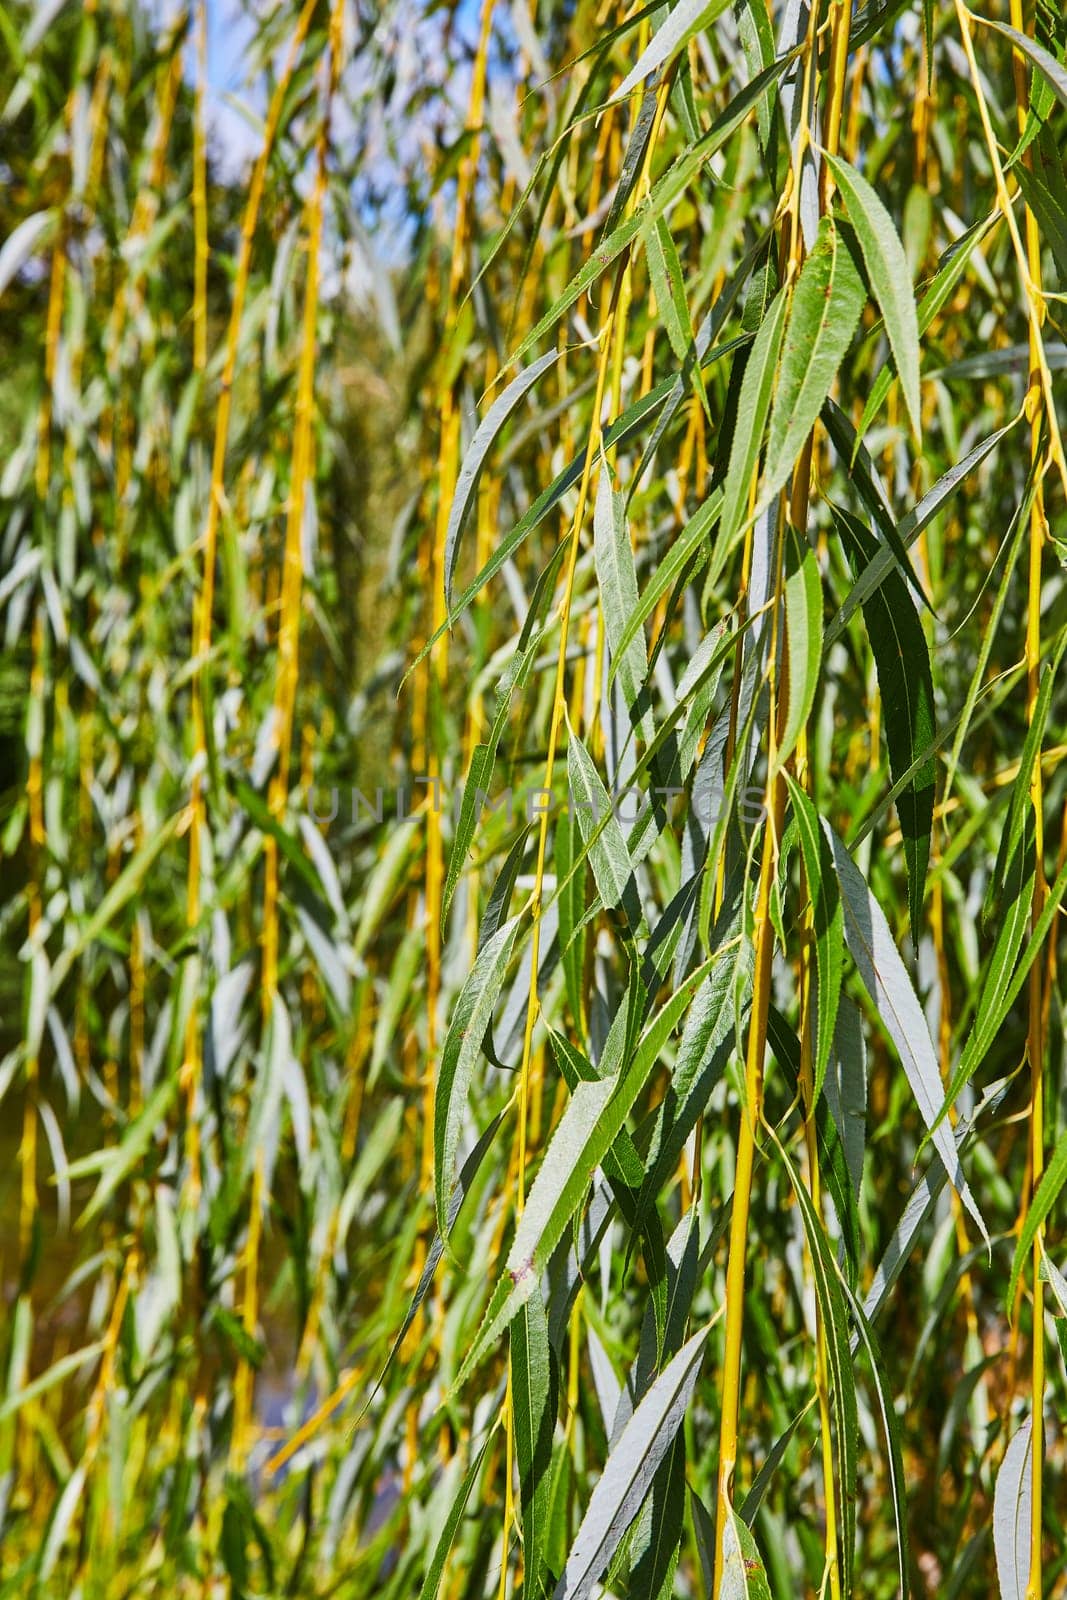 Willow Leaves in Early Fall Sunlight with Bokeh Background by njproductions